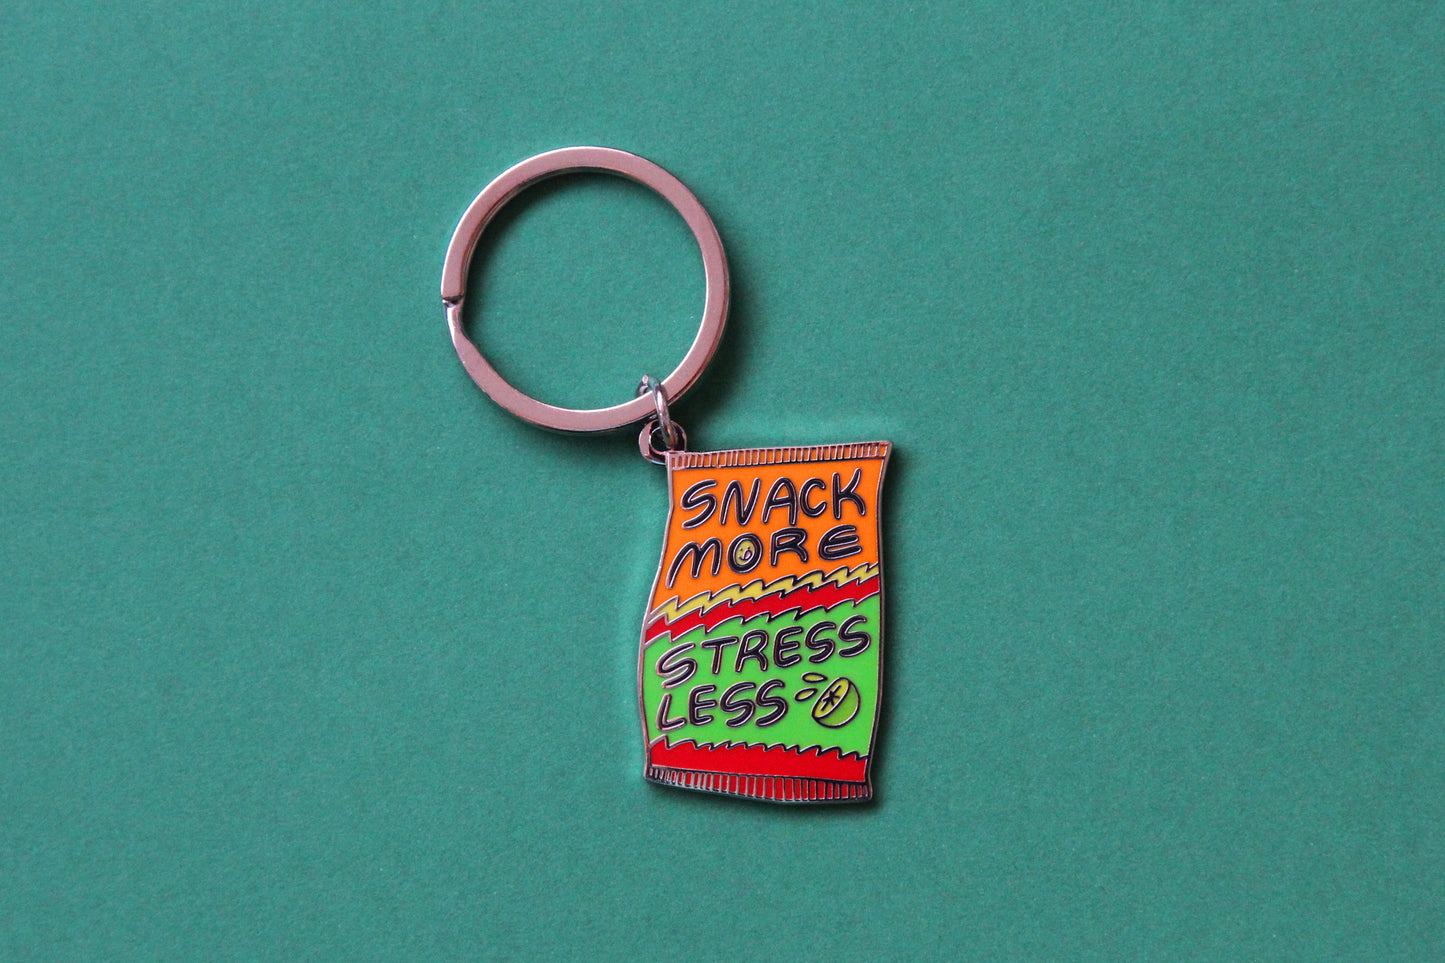 An enamel keychain showing a chip bag that says "Snack More Stress Less" over a green background.